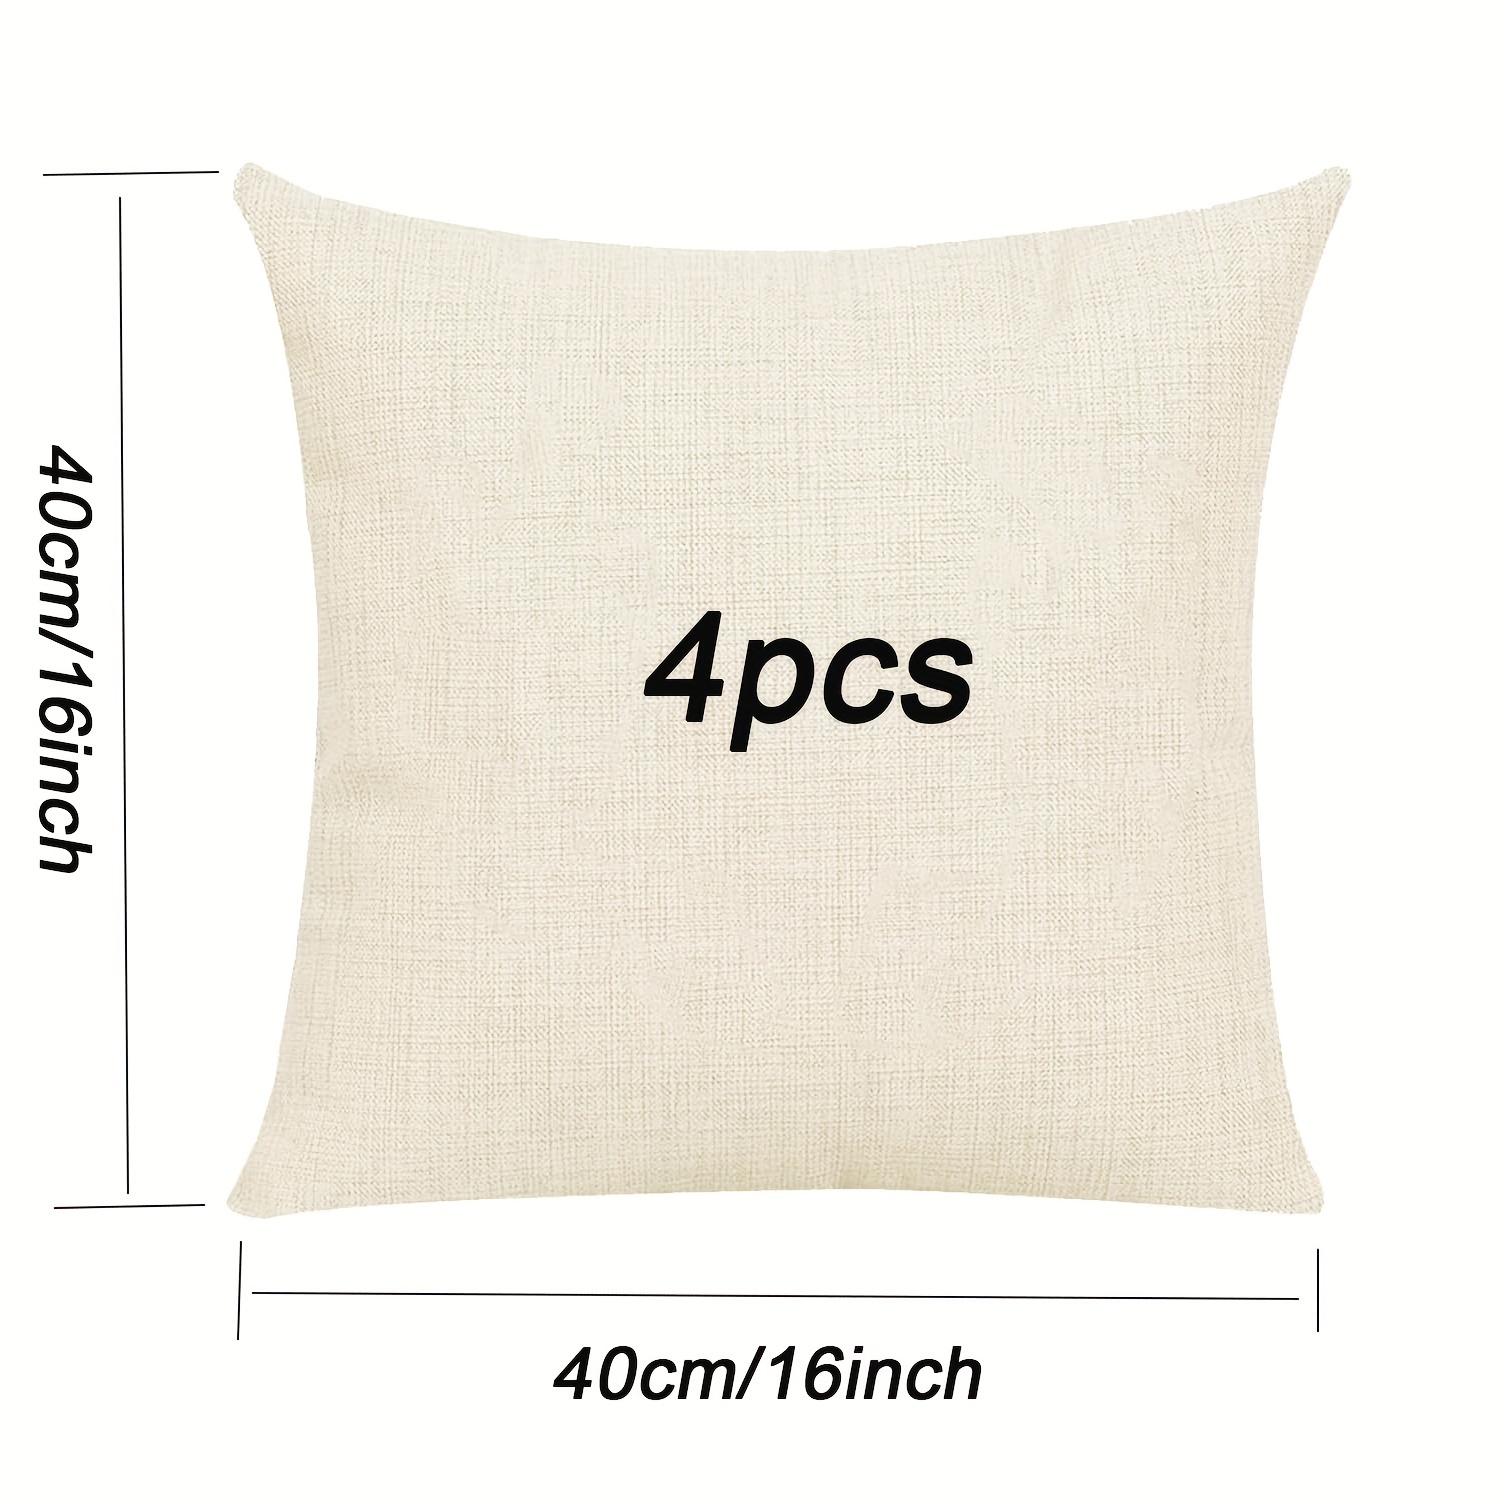 Sublimation Pillow Cases White Cushion Covers Blanks Pillow Covers